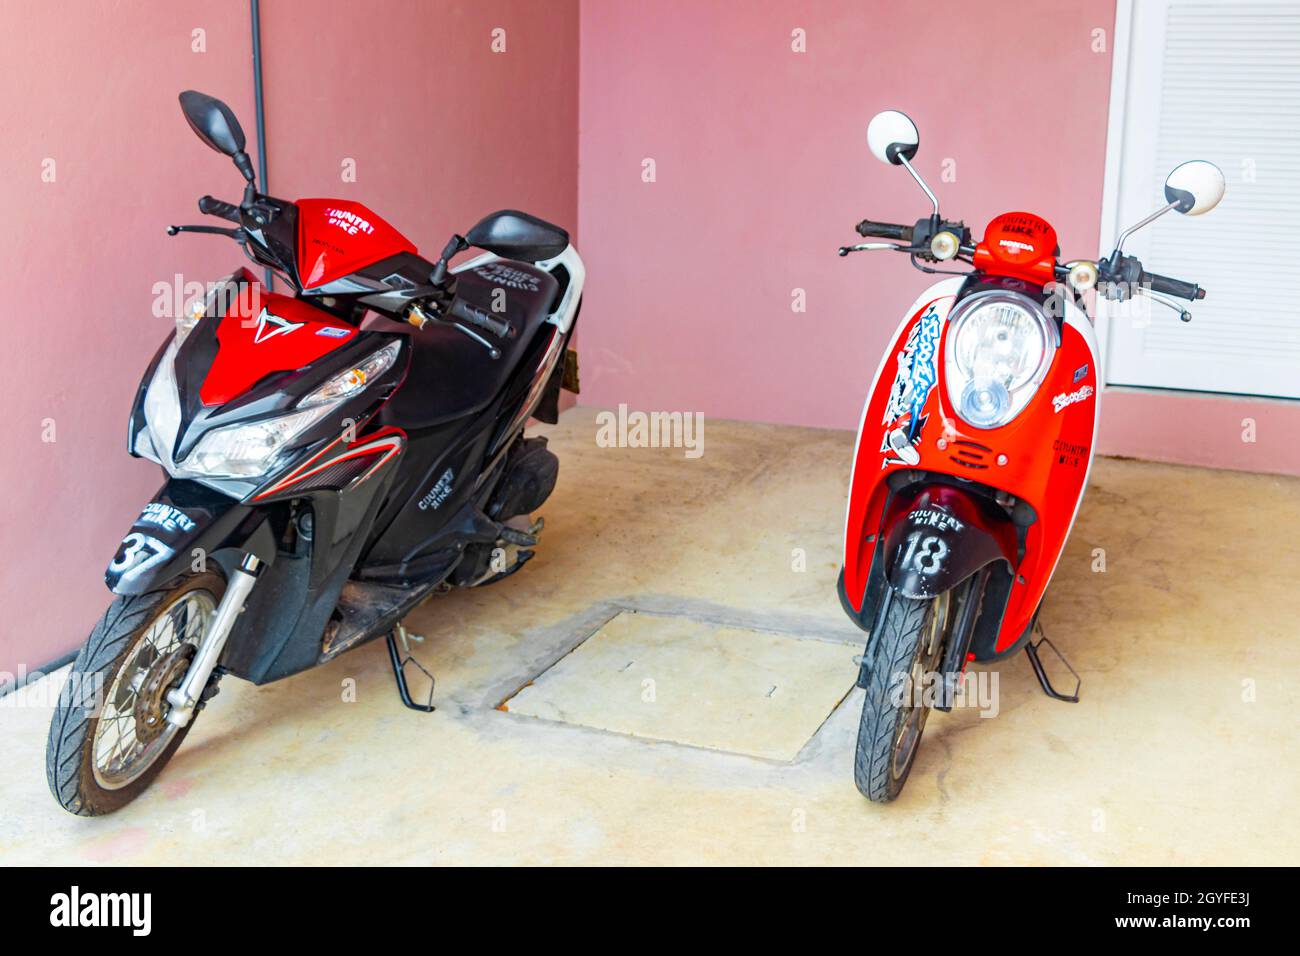 Surat Thani Thailand 26. Mai 2018 How much does it cost to rent scooters  mopeds motorbikes and motorcycles on Koh Samui in Thailand Stock Photo -  Alamy